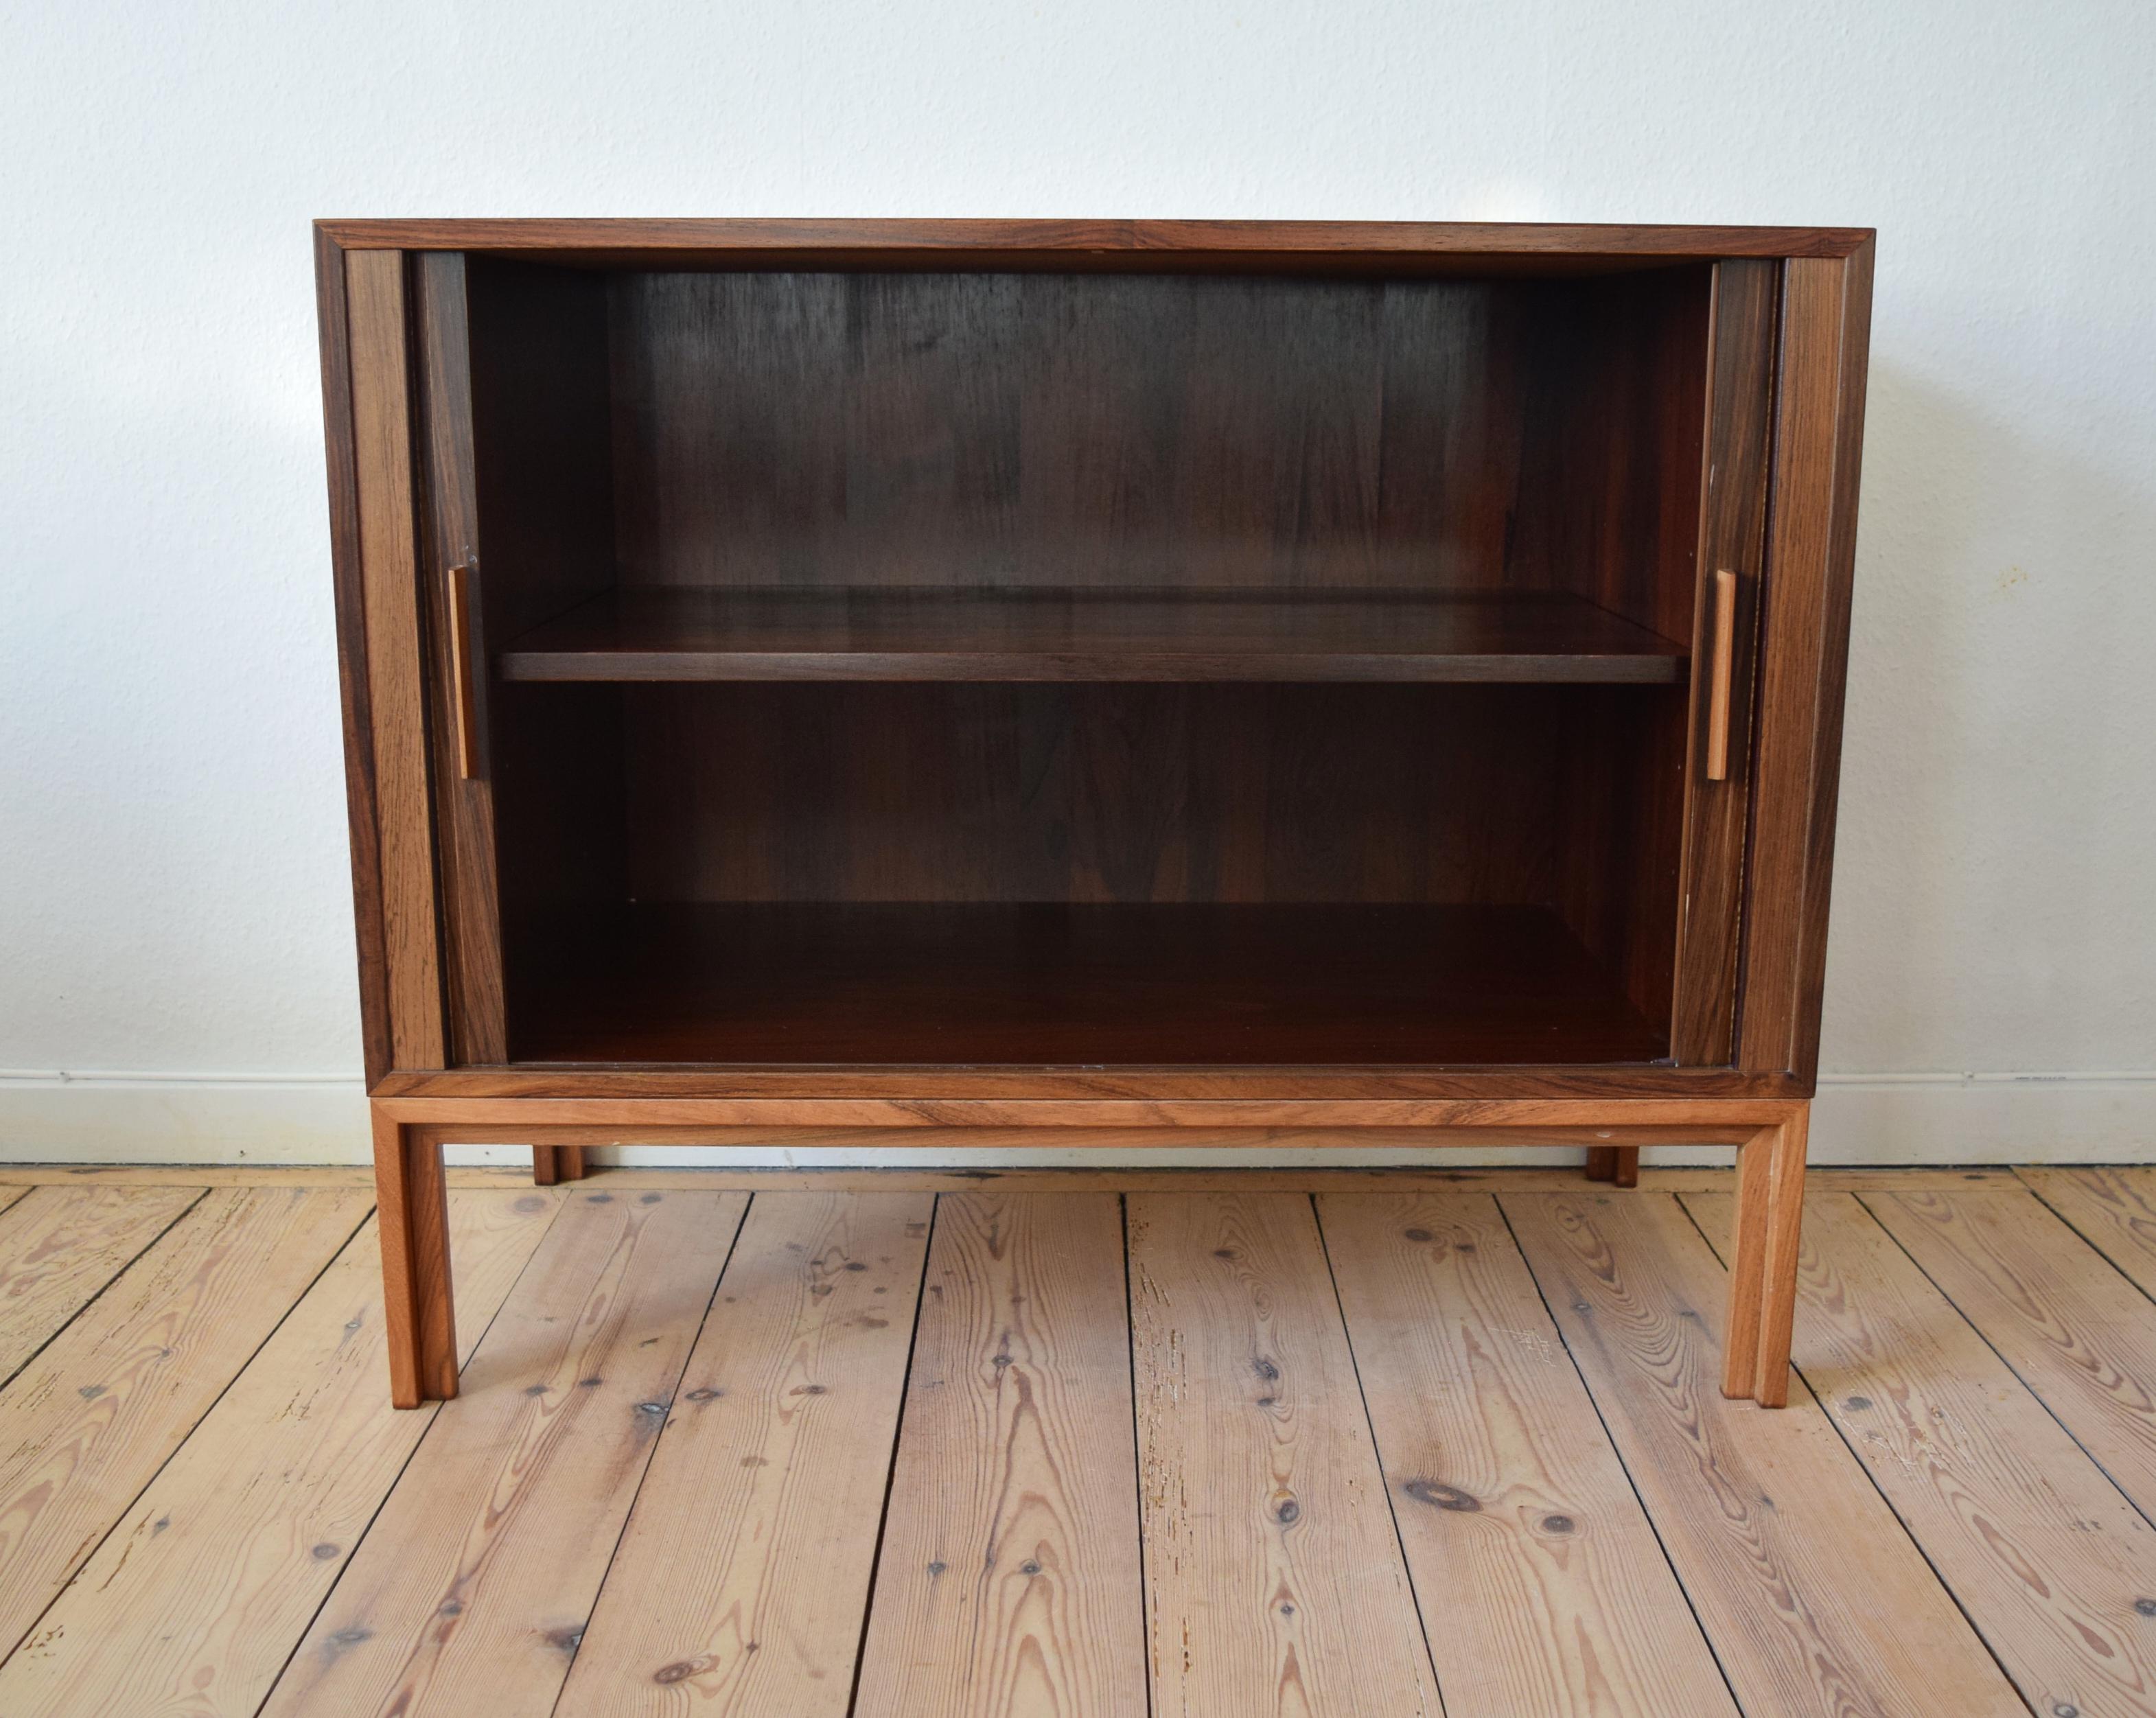 Danish rosewood bar cabinet by Kai Kristiansen for FM Møbler. Manufactured in the 1960s, this piece features two tambour doors with adjustable internal shelf. Sits on frame base solid rosewood legs. Striking rosewood grain throughout. We have more